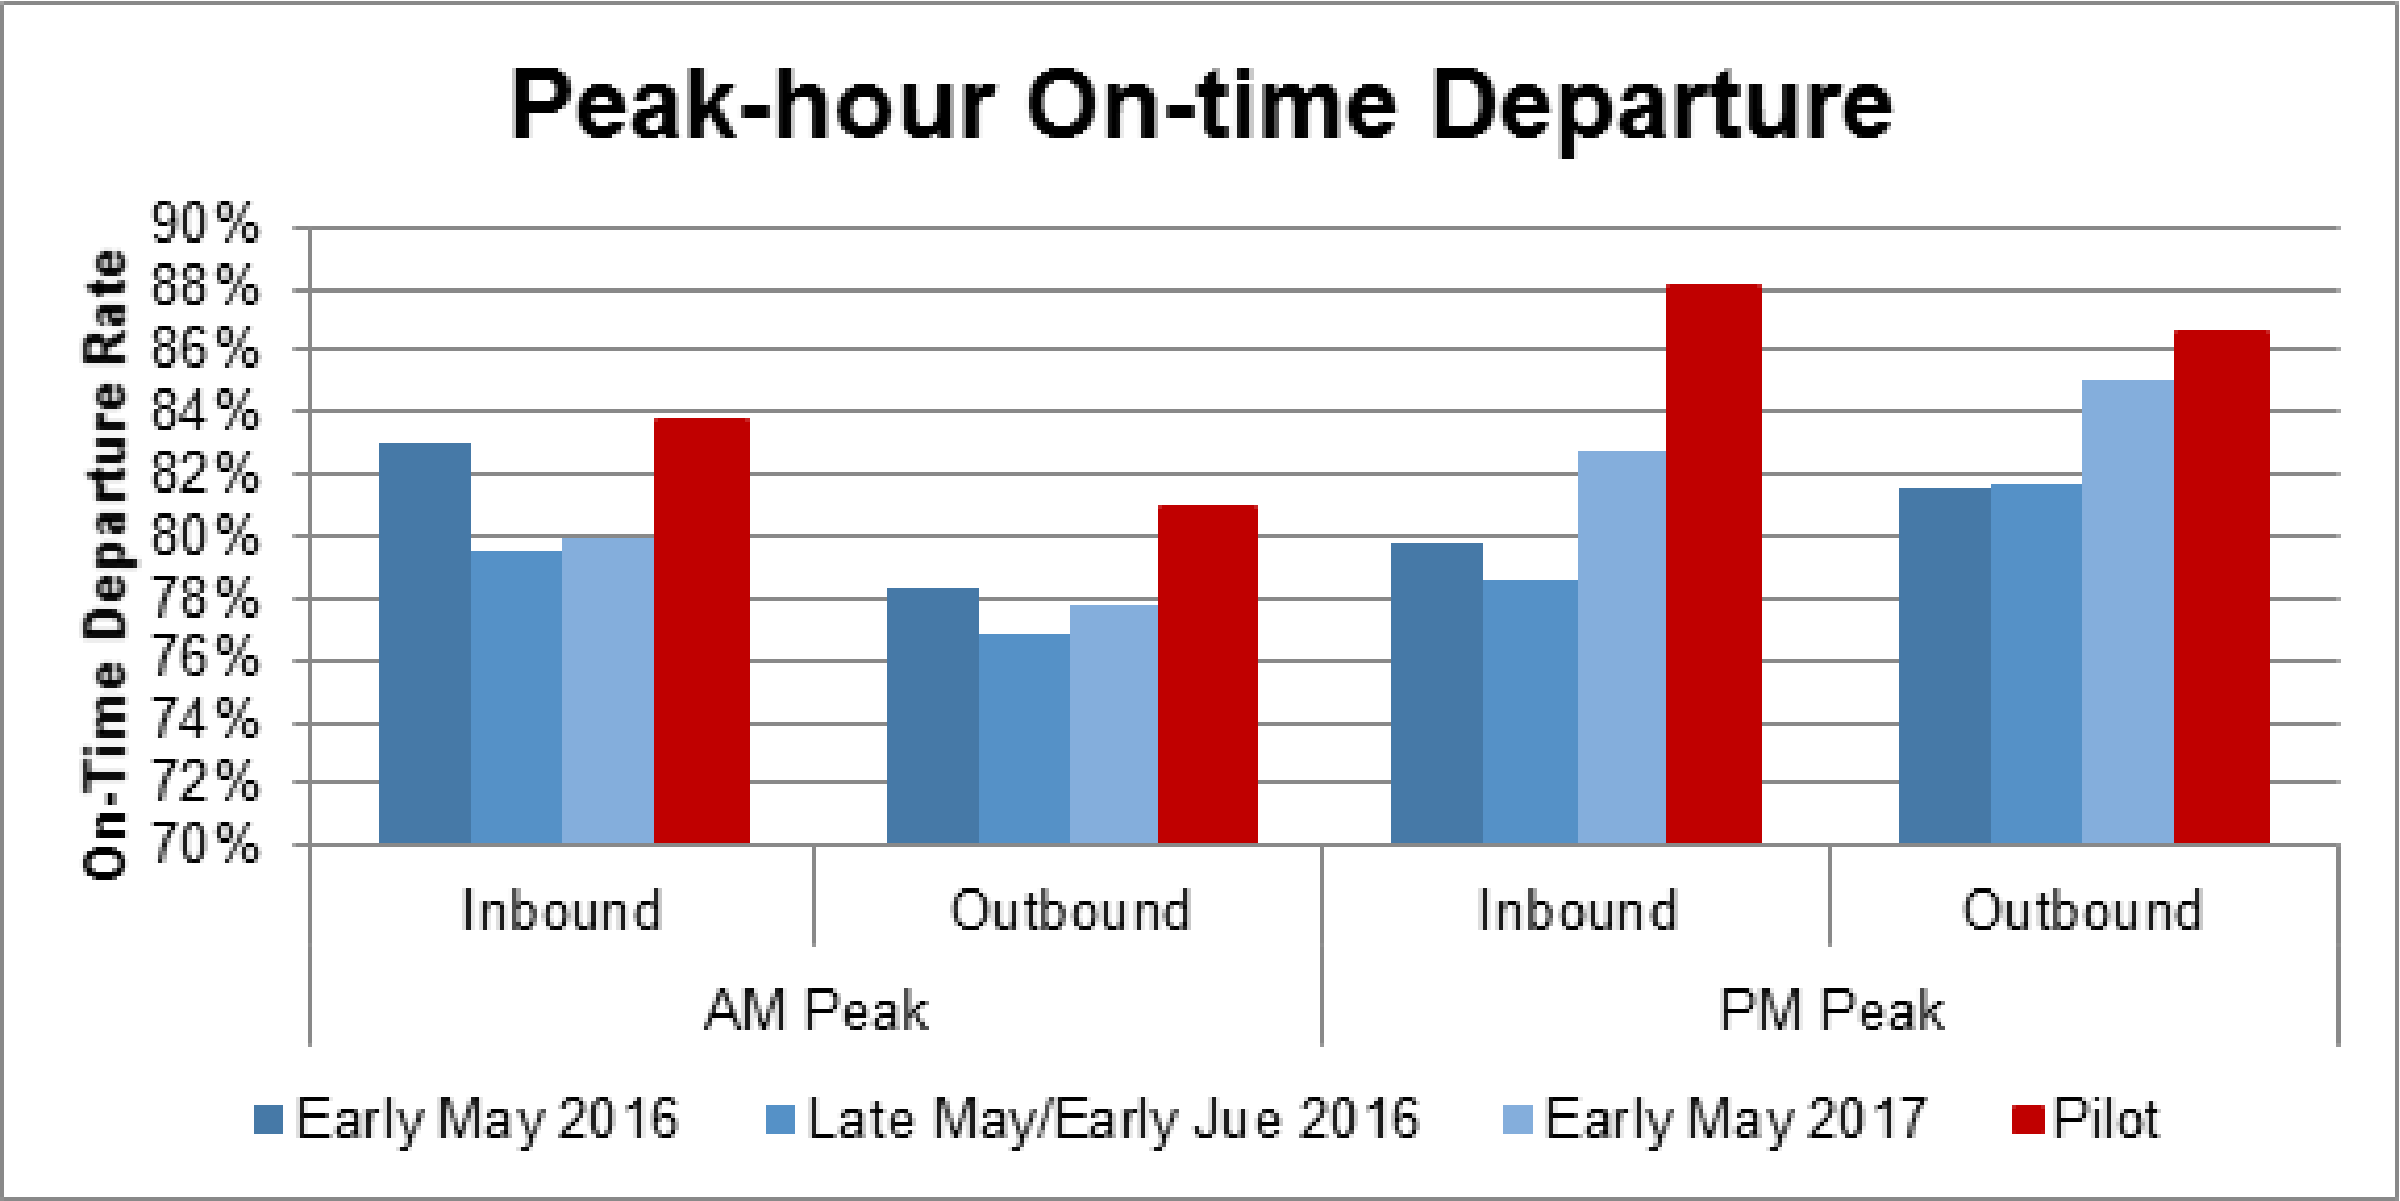 Chart showing on-time departure percentage at terminals during the pilot and baseline periods.